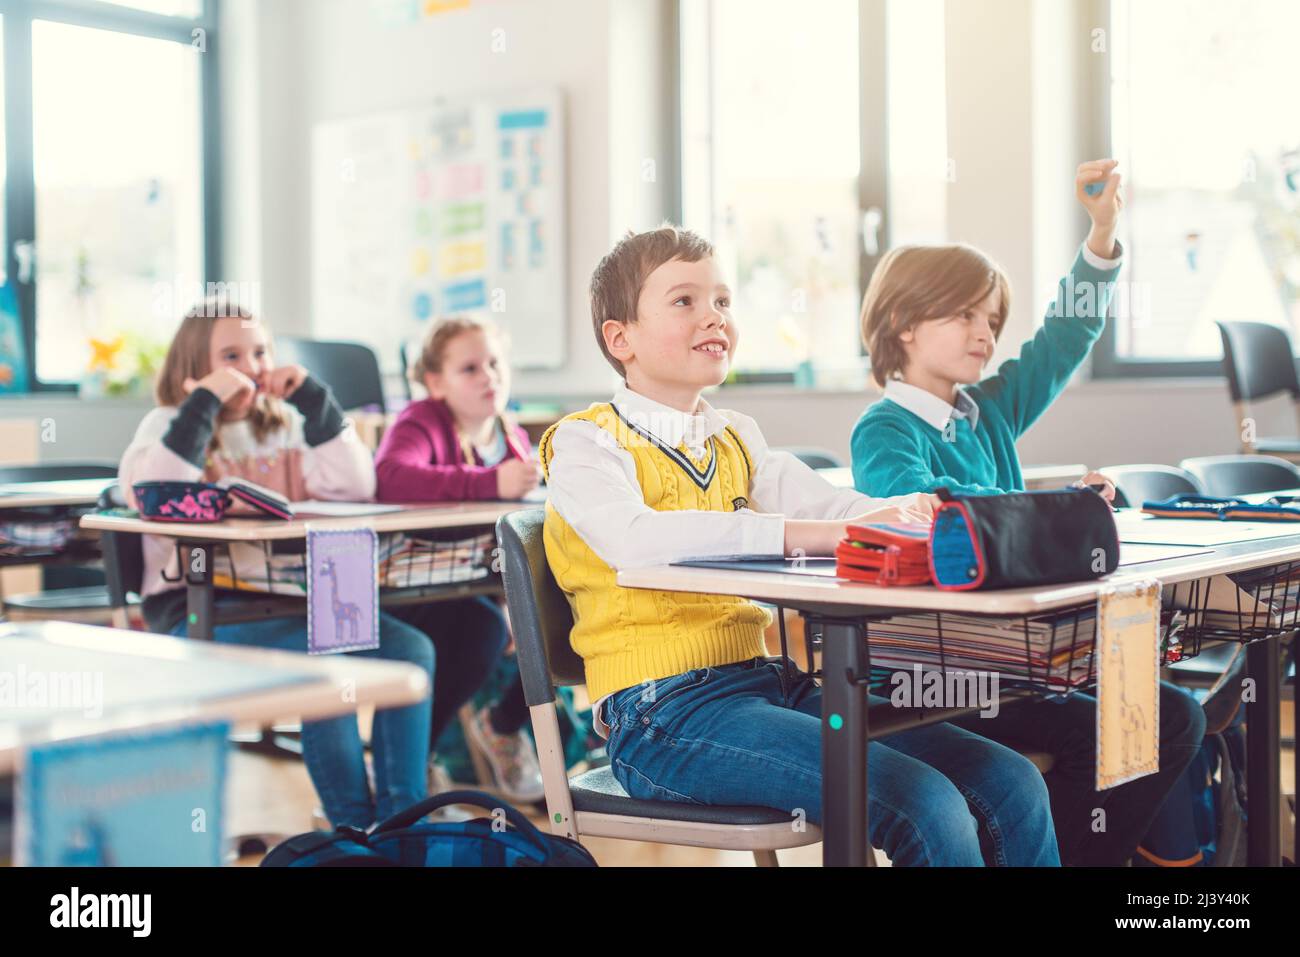 Pupils in elementary school class raising hands to answer Stock Photo